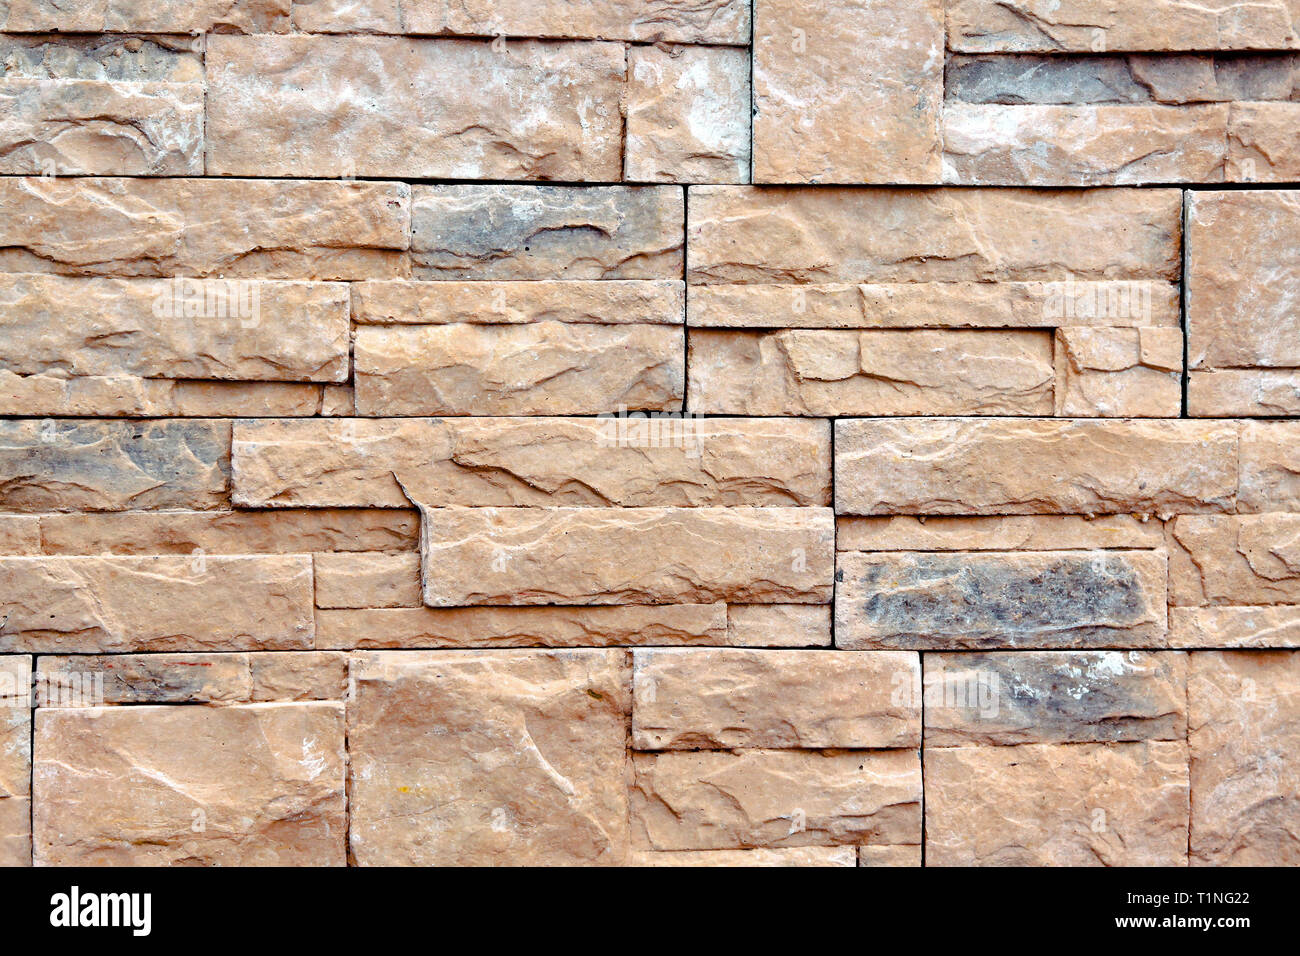 Background Image Of Wall Made Of Natural Stone Tiles Stock Photo Alamy